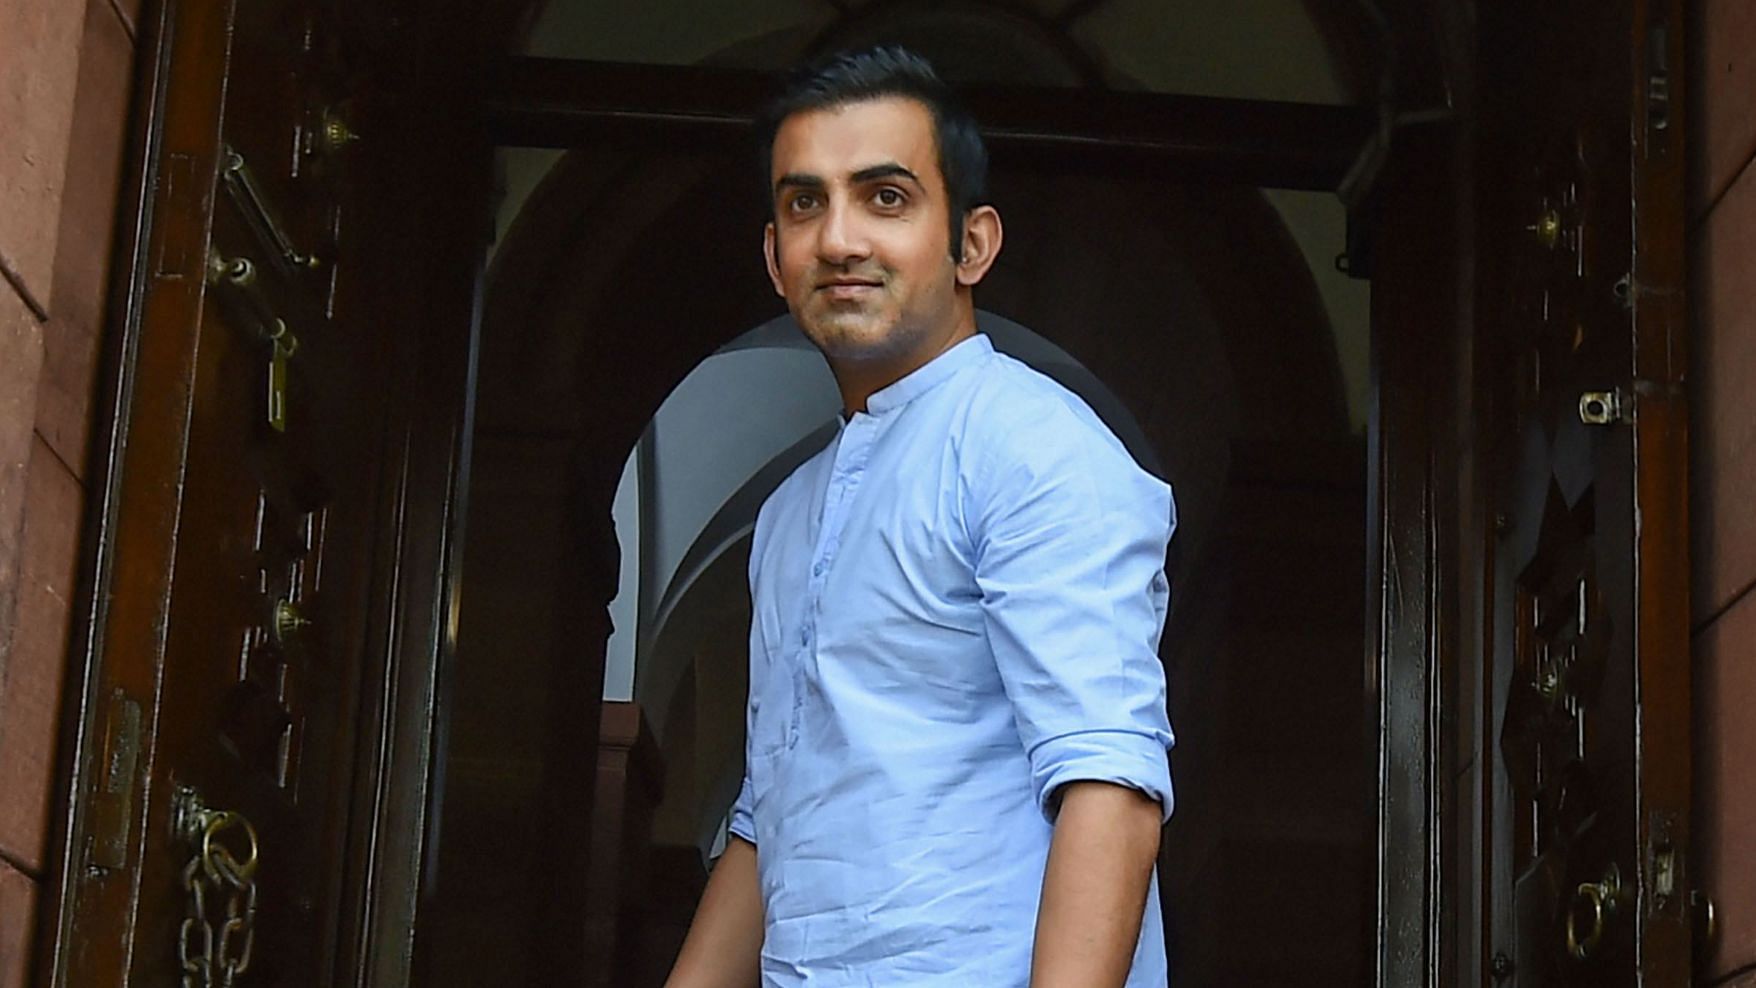 Gautam Gambhir, Irfan Pathan, Rohan Bopanna have condemned the attacks by an unidentified mob on students and professors of the Jawaharlal Nehru University.